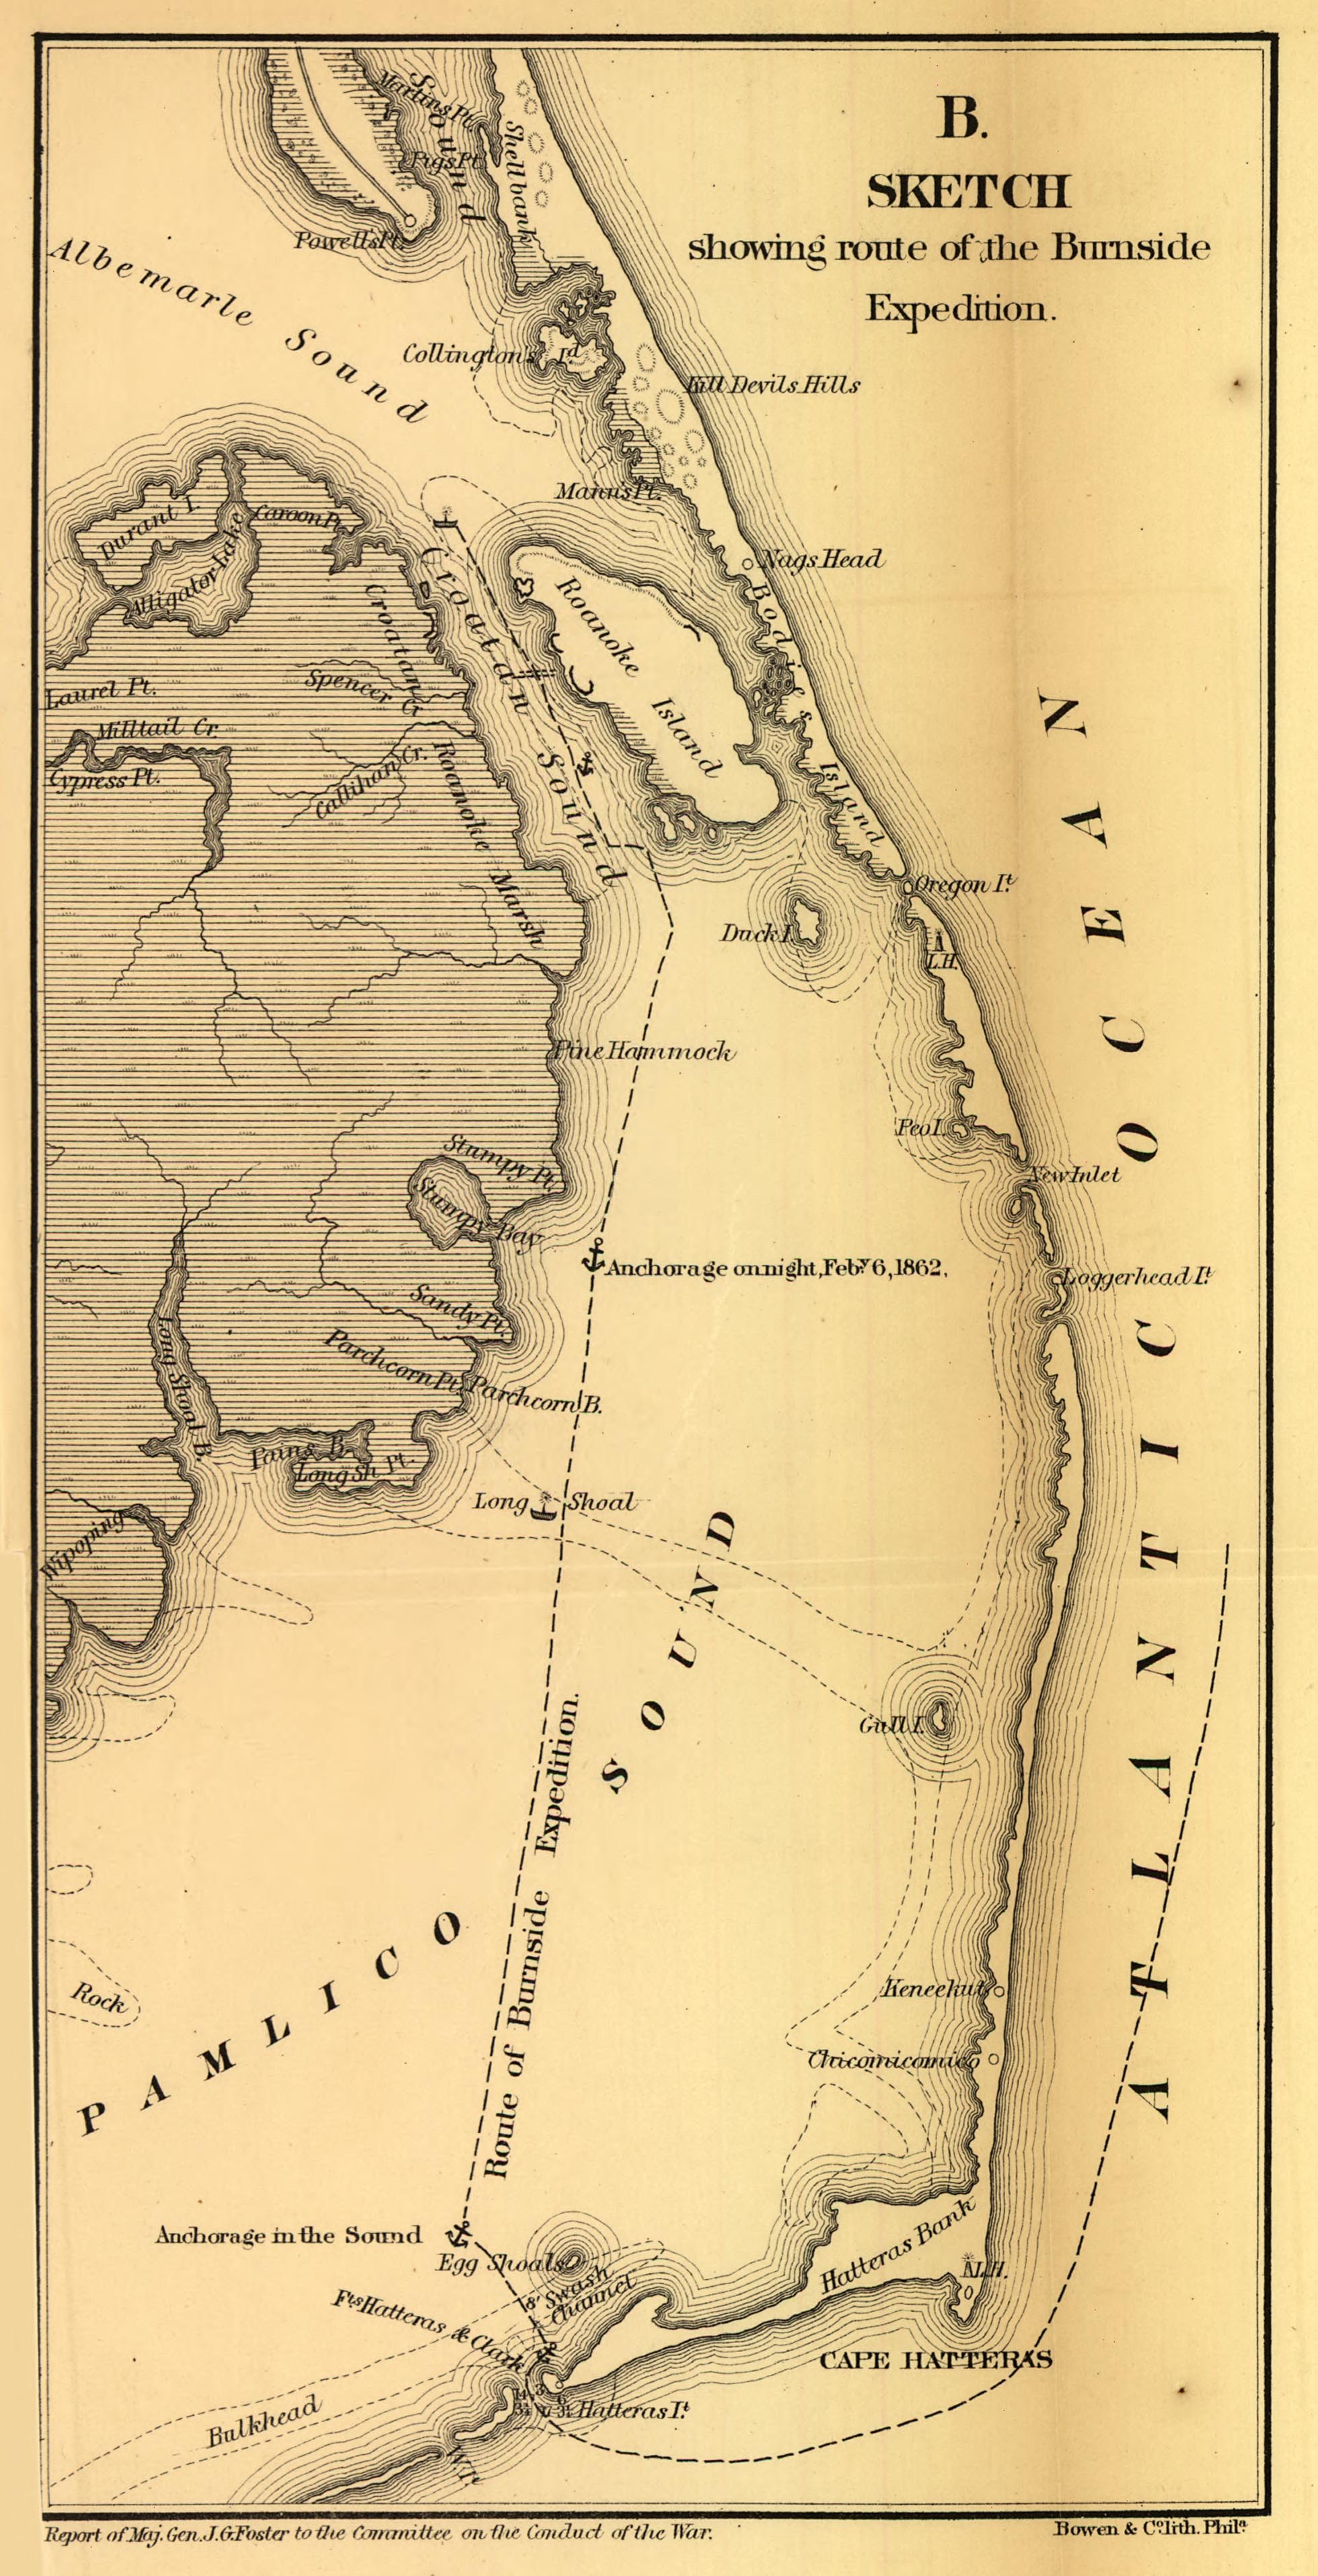 Sketch showing route of the Burnside expedition